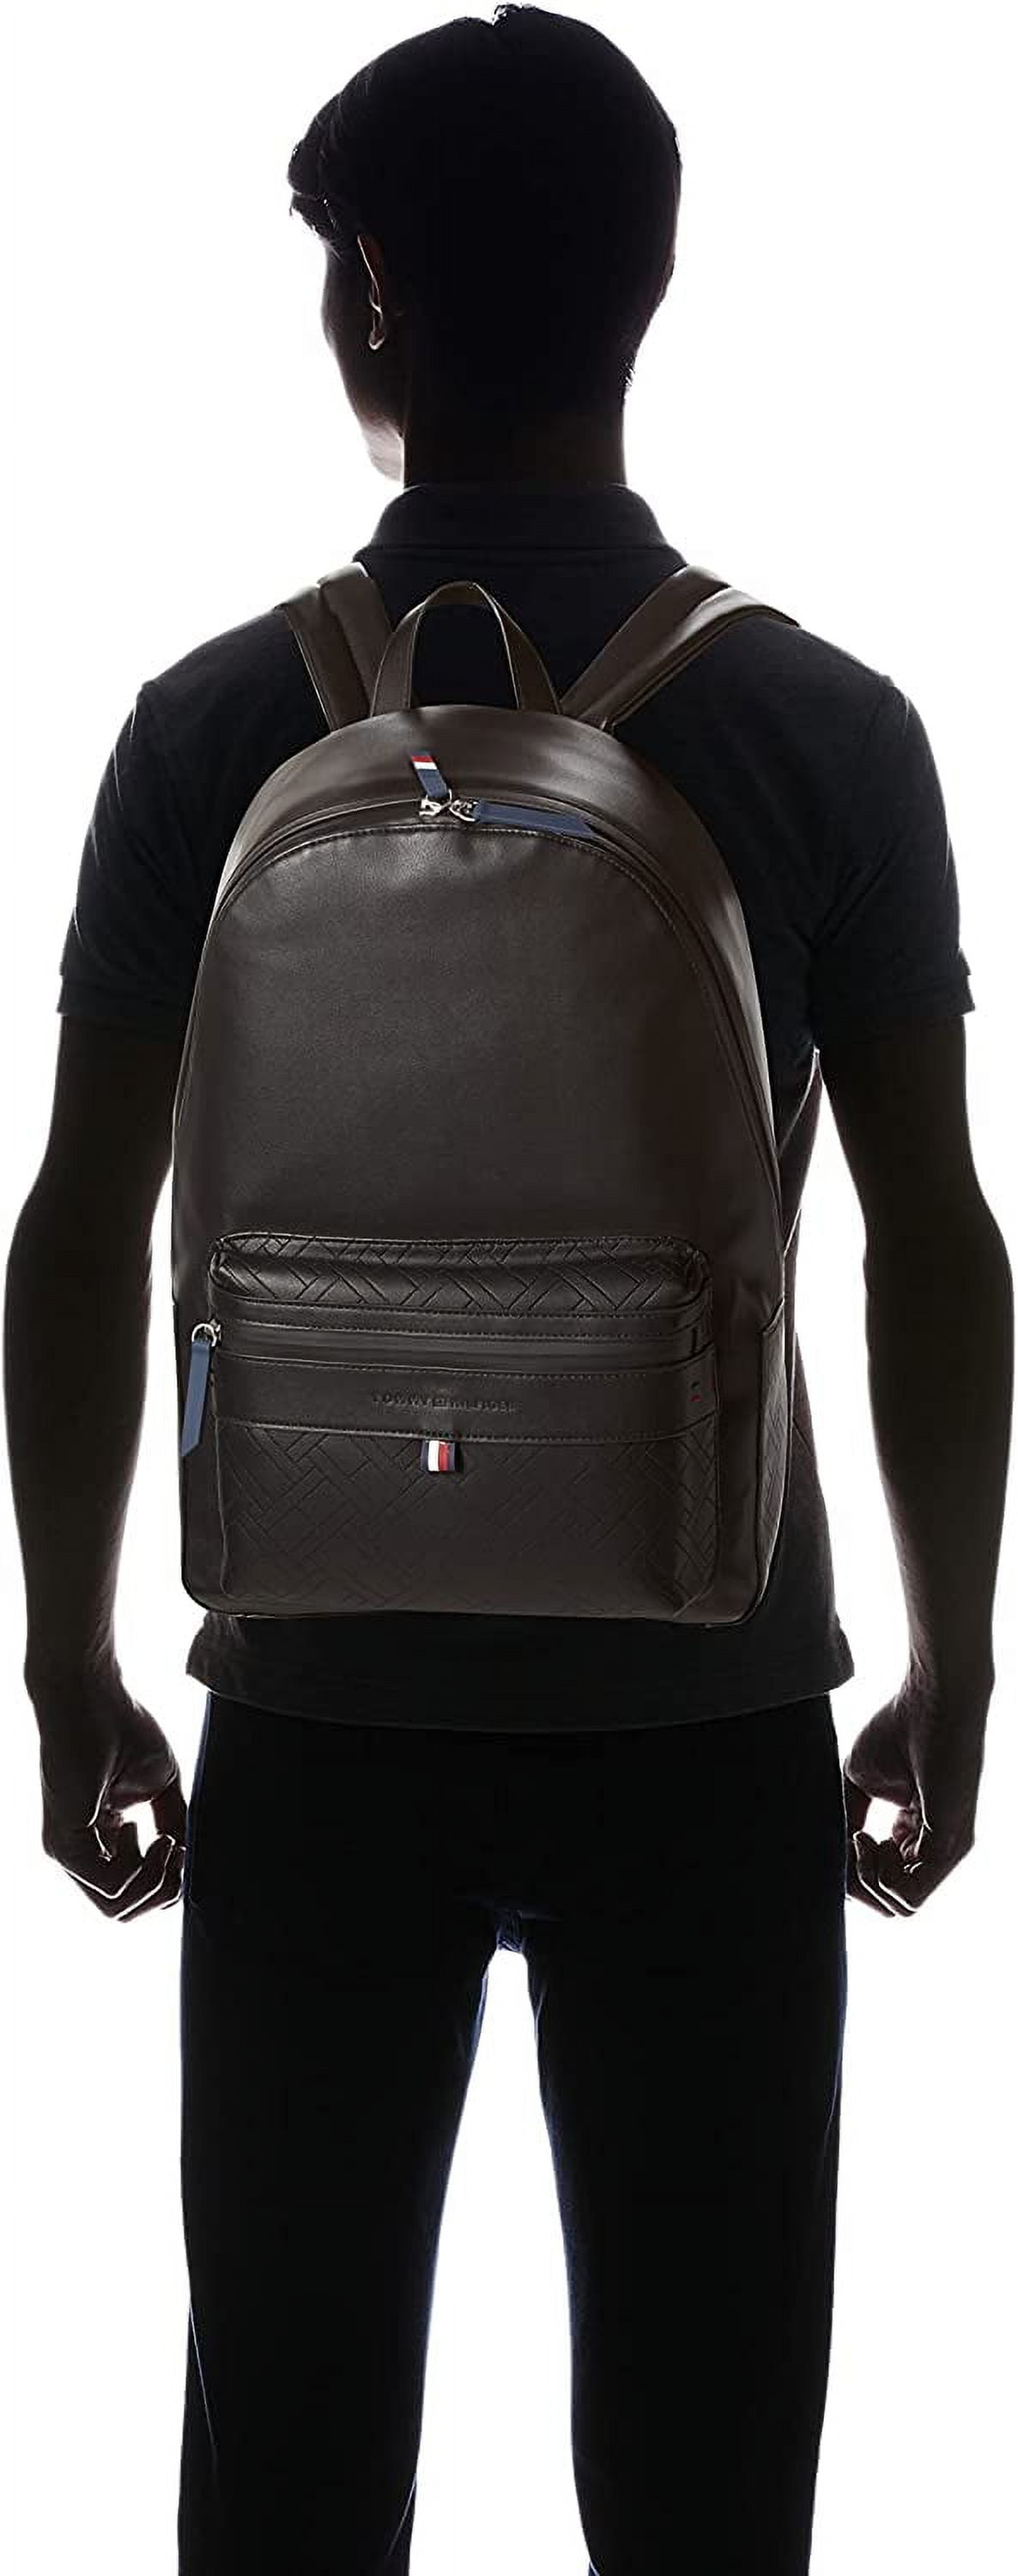 Backpacks Tommy Hilfiger - Icon Tommy Monogram backpack in black -  AW0A09956DW5